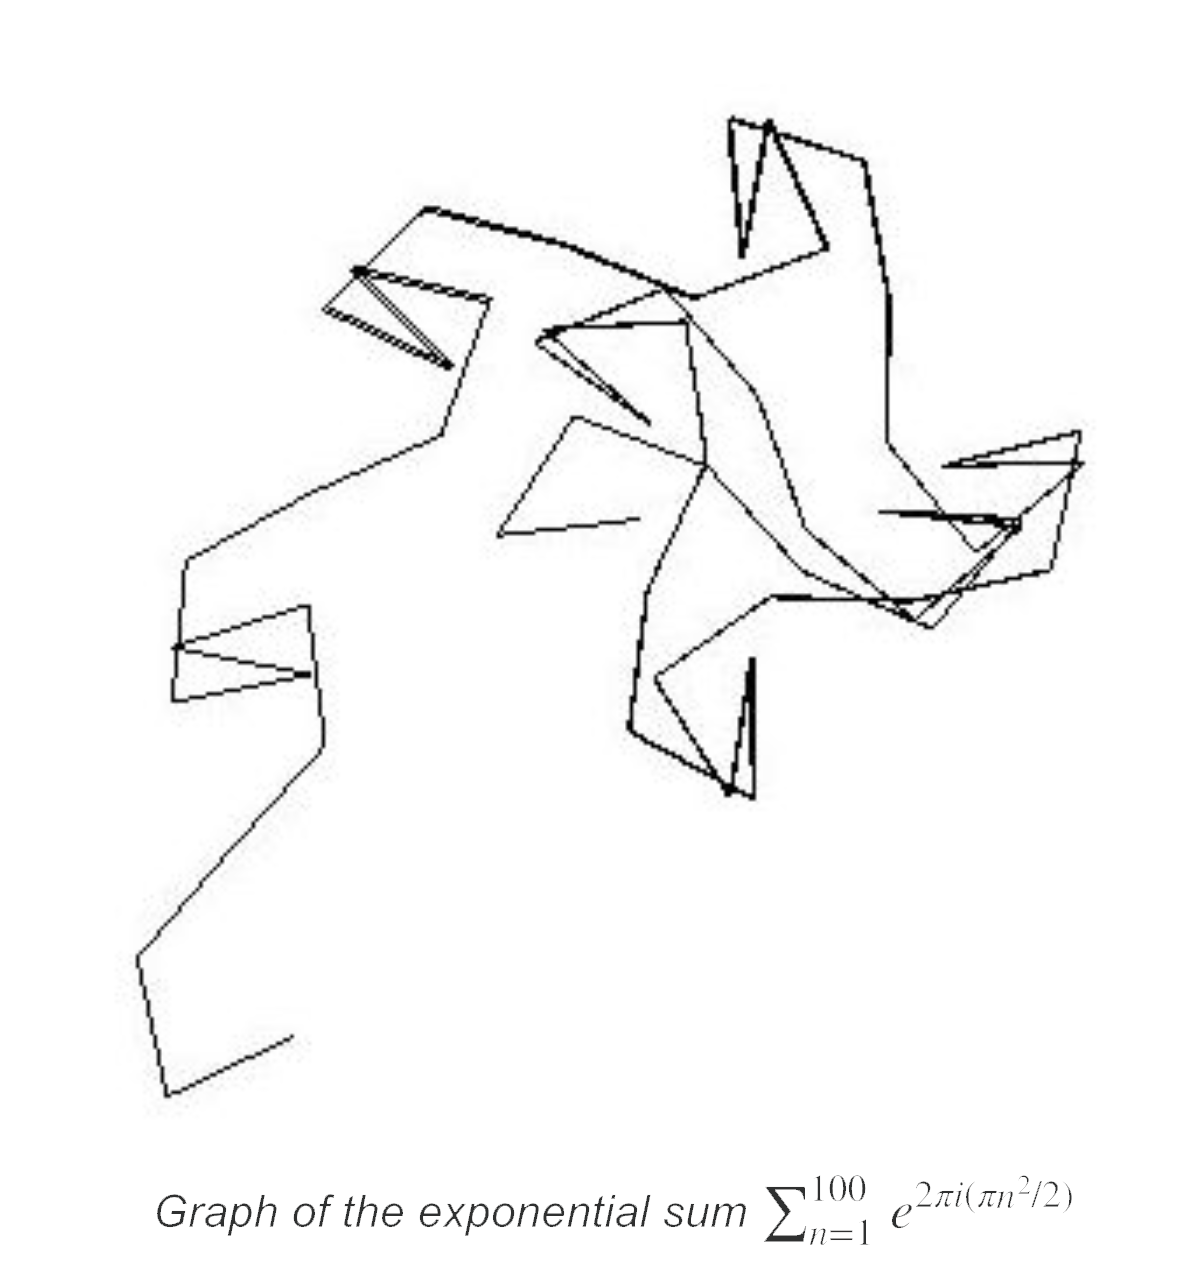 Graph of the exponential sum 